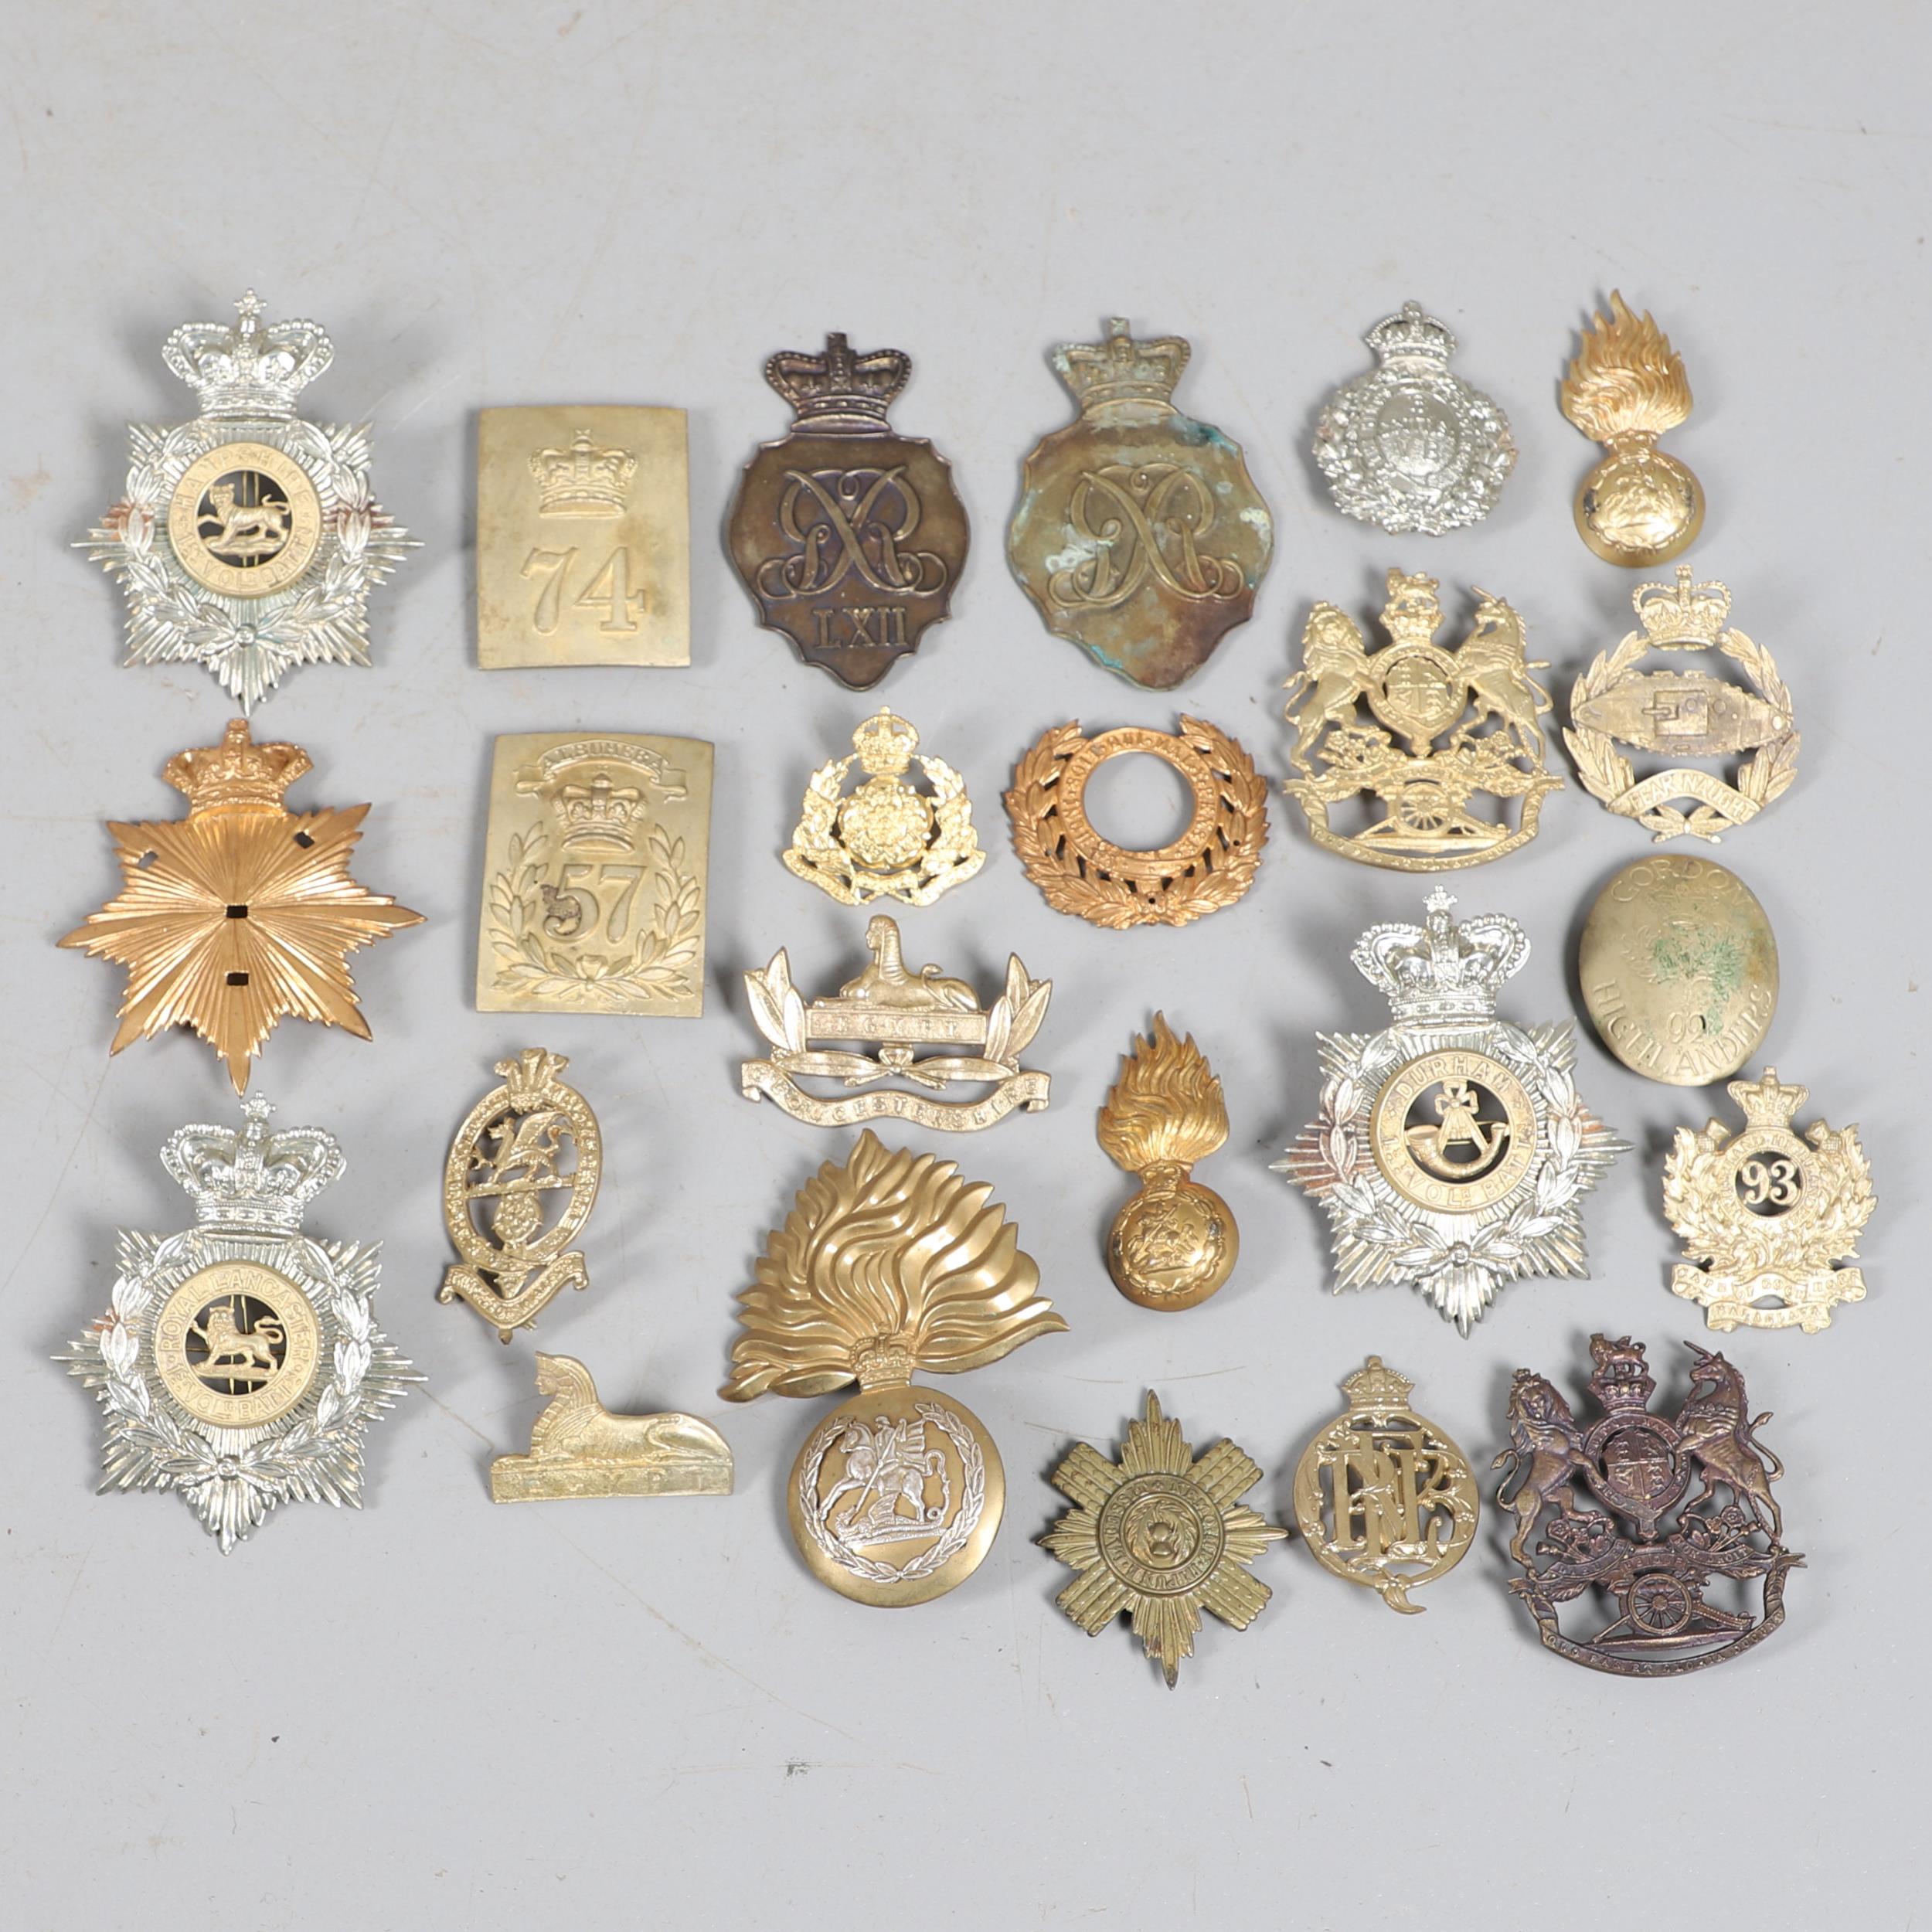 A COLLECTION OF VICTORIAN STYLE HELMET PLATES AND OTHER BADGES.